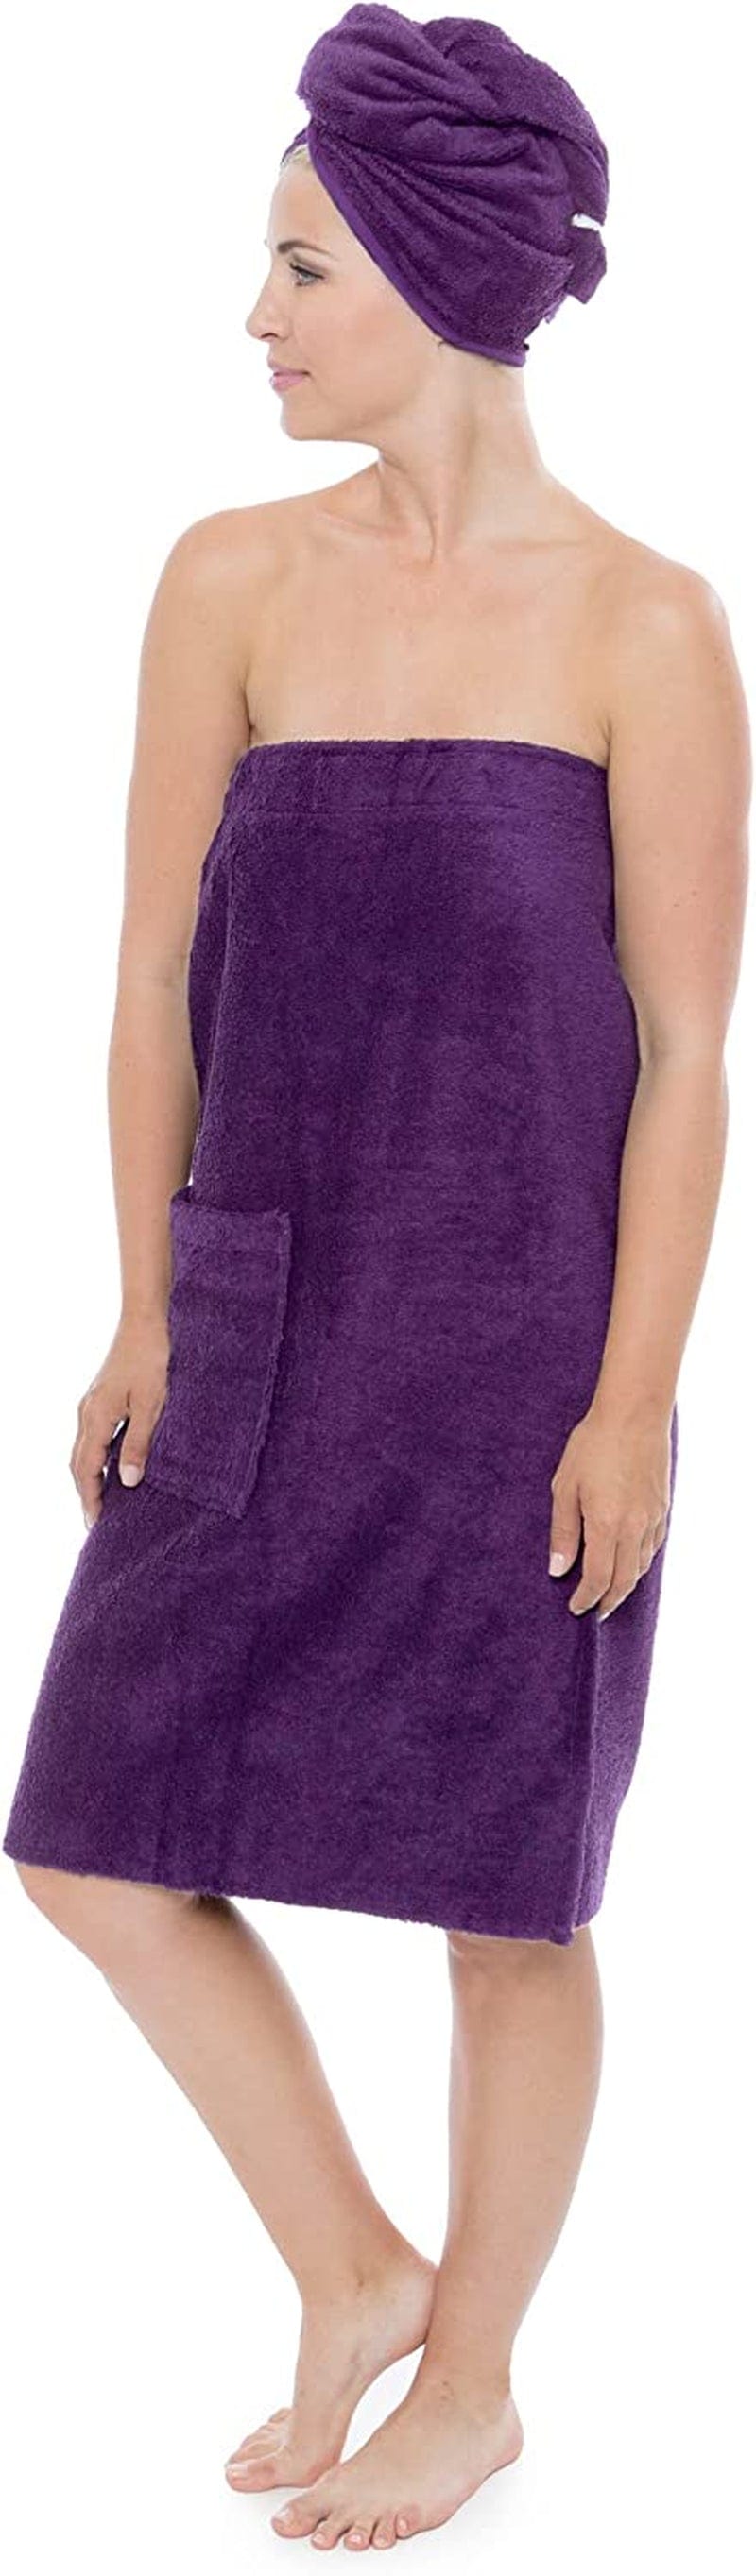 Women'S Towel Wrap - Bamboo Viscose Spa Wrap Set by Texere (The Waterfall, Barely Pink, Large/X-Large)